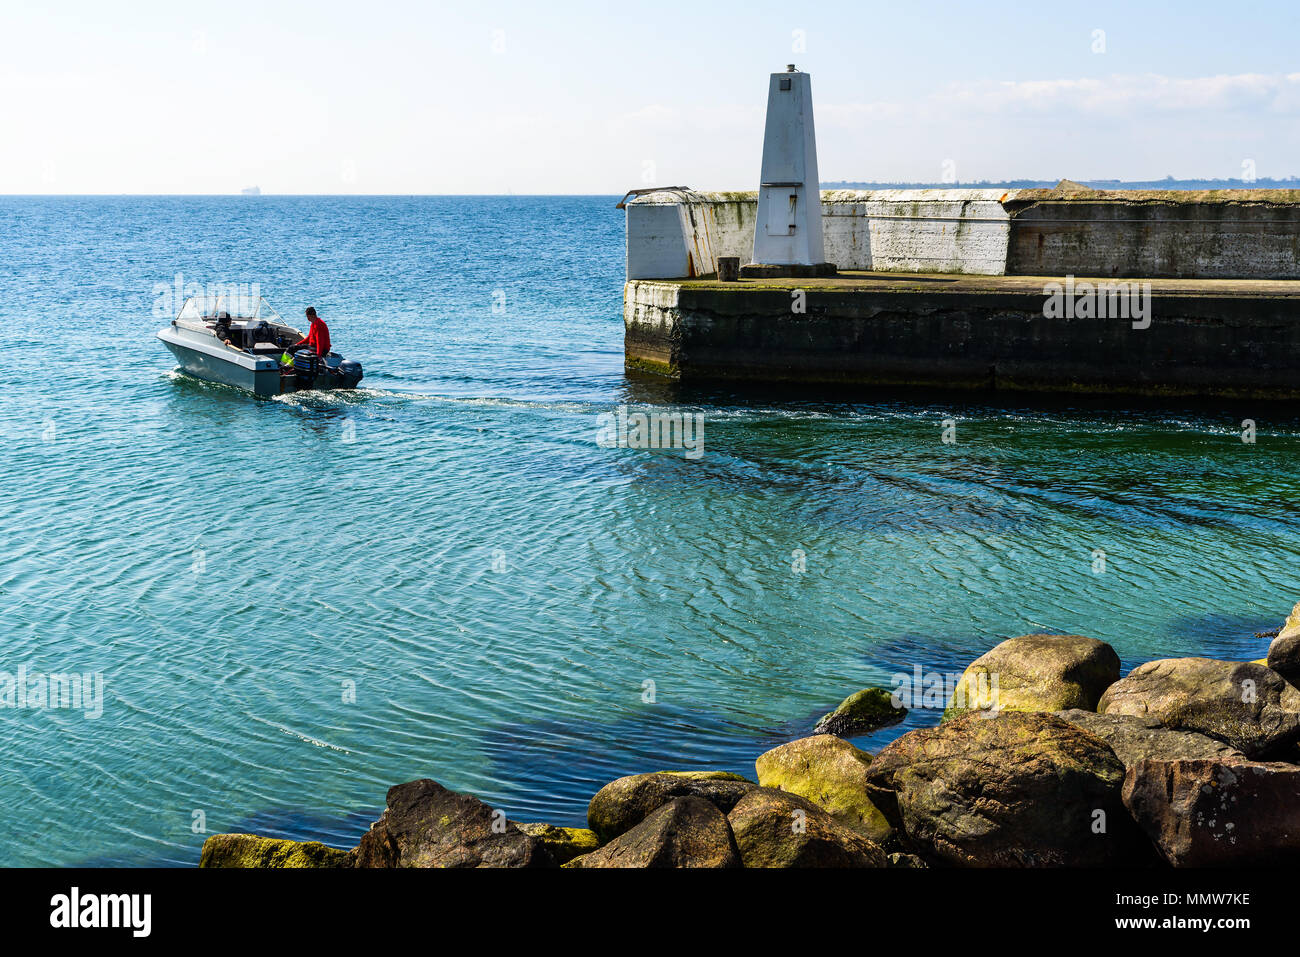 Alabodarna, Sweden - April 29, 2018: Documentary of everyday life and place. Small motorboat leaving the harbor on a sunny and hazy day. Stock Photo